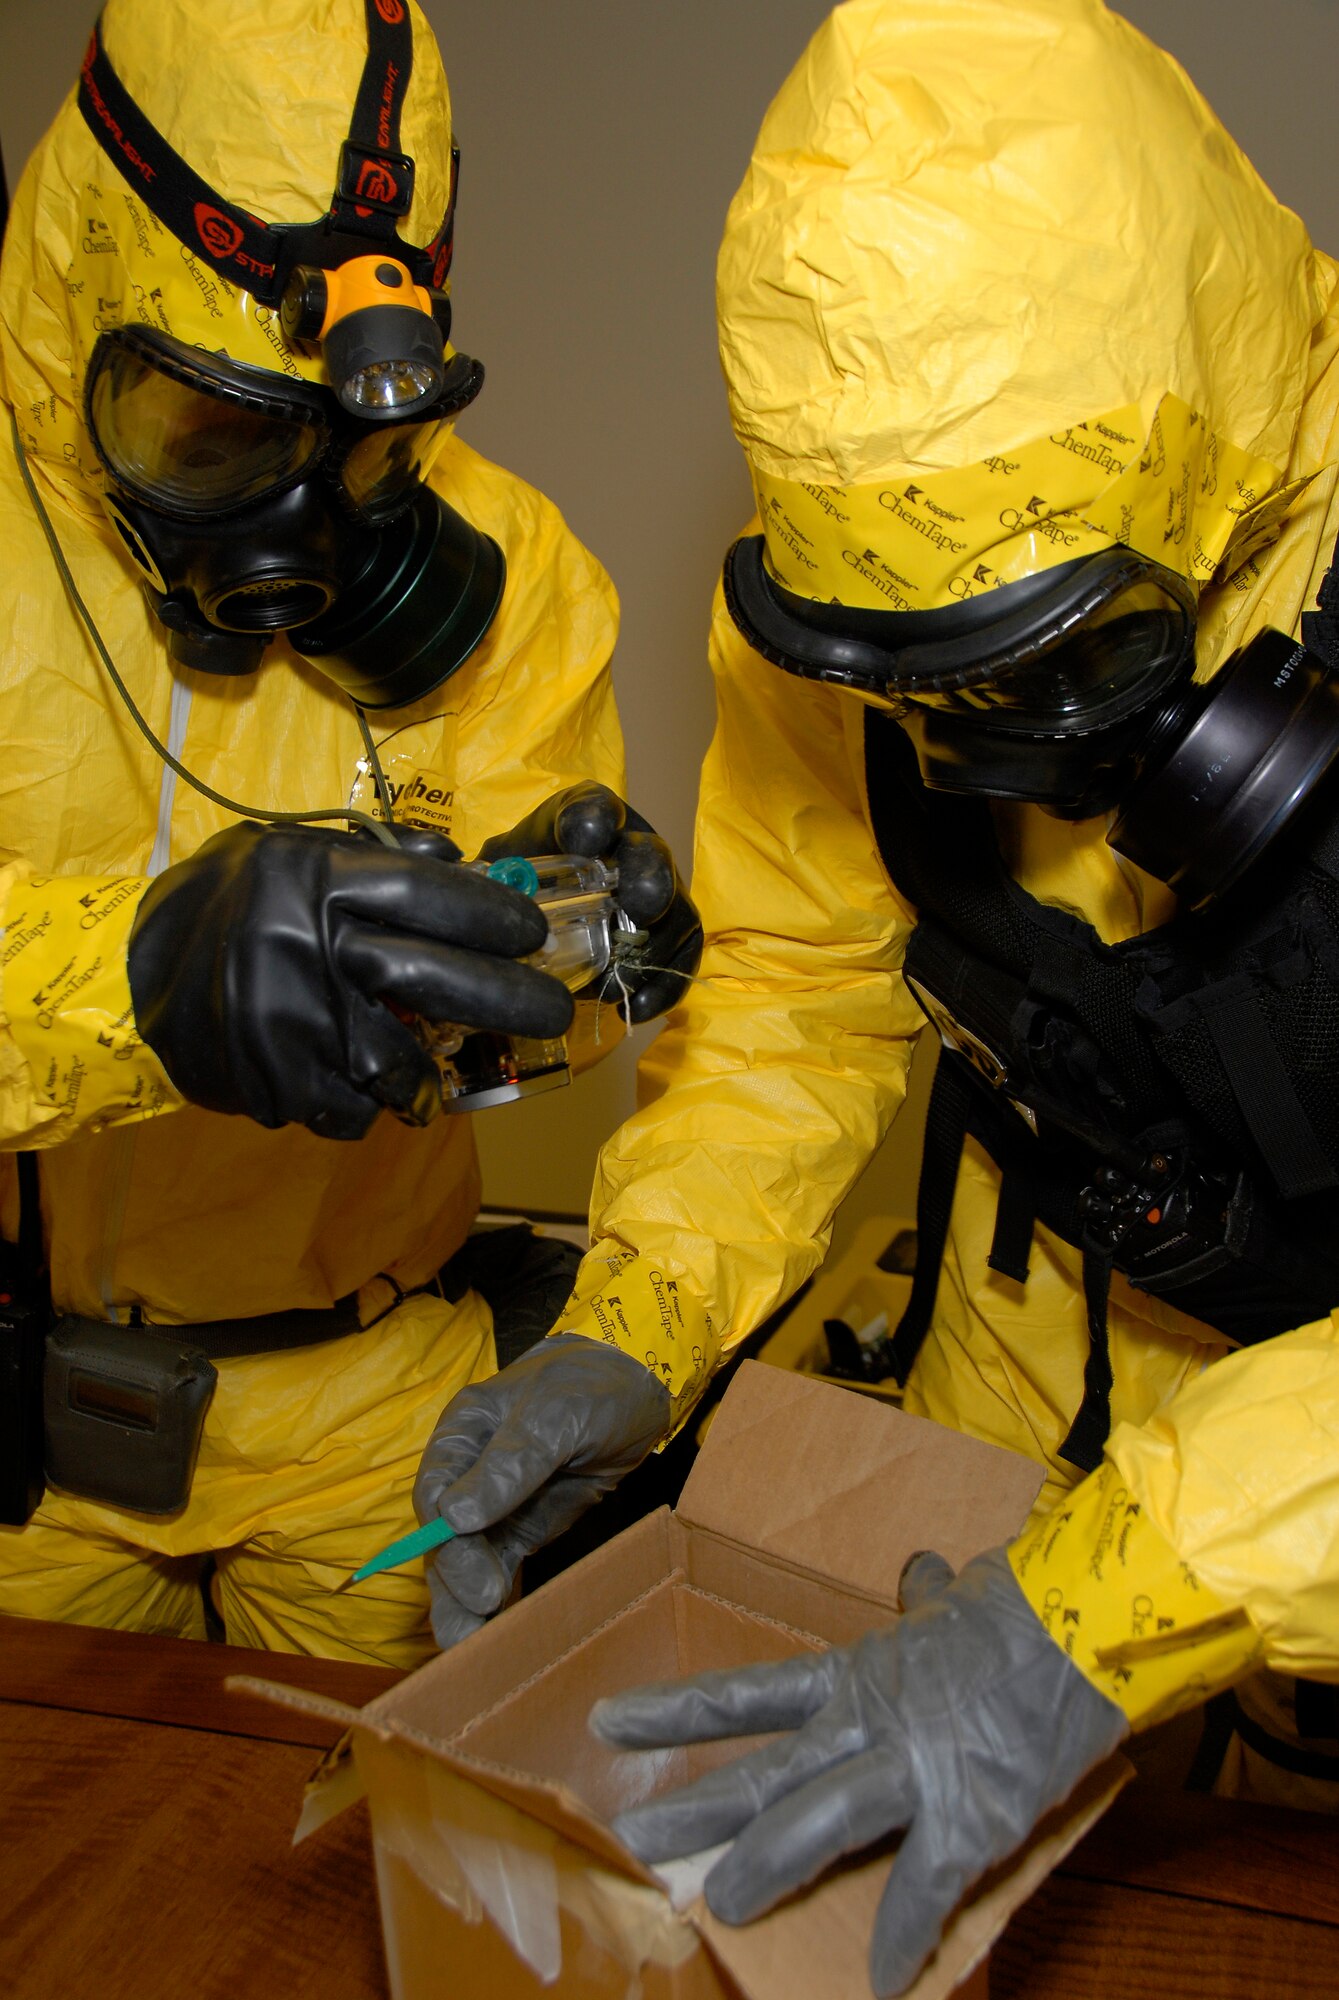 Two members of the 54th Civil Support Team open and examine the contents of a suspicious package during a joint exercise here March 18. The 54th CST provided support on examination, testing and extraction of the package. They also assisted the 115th Explosive Ordnance Disposal Flight with decontamination of their equipment. The joint exercise included many different units on Truax Field as well as the U.S. Postal Service, Federal Bureau of Investigation and the 54th CST. (U.S. Air Force Photo by Master Sgt. Dan Richardson)
